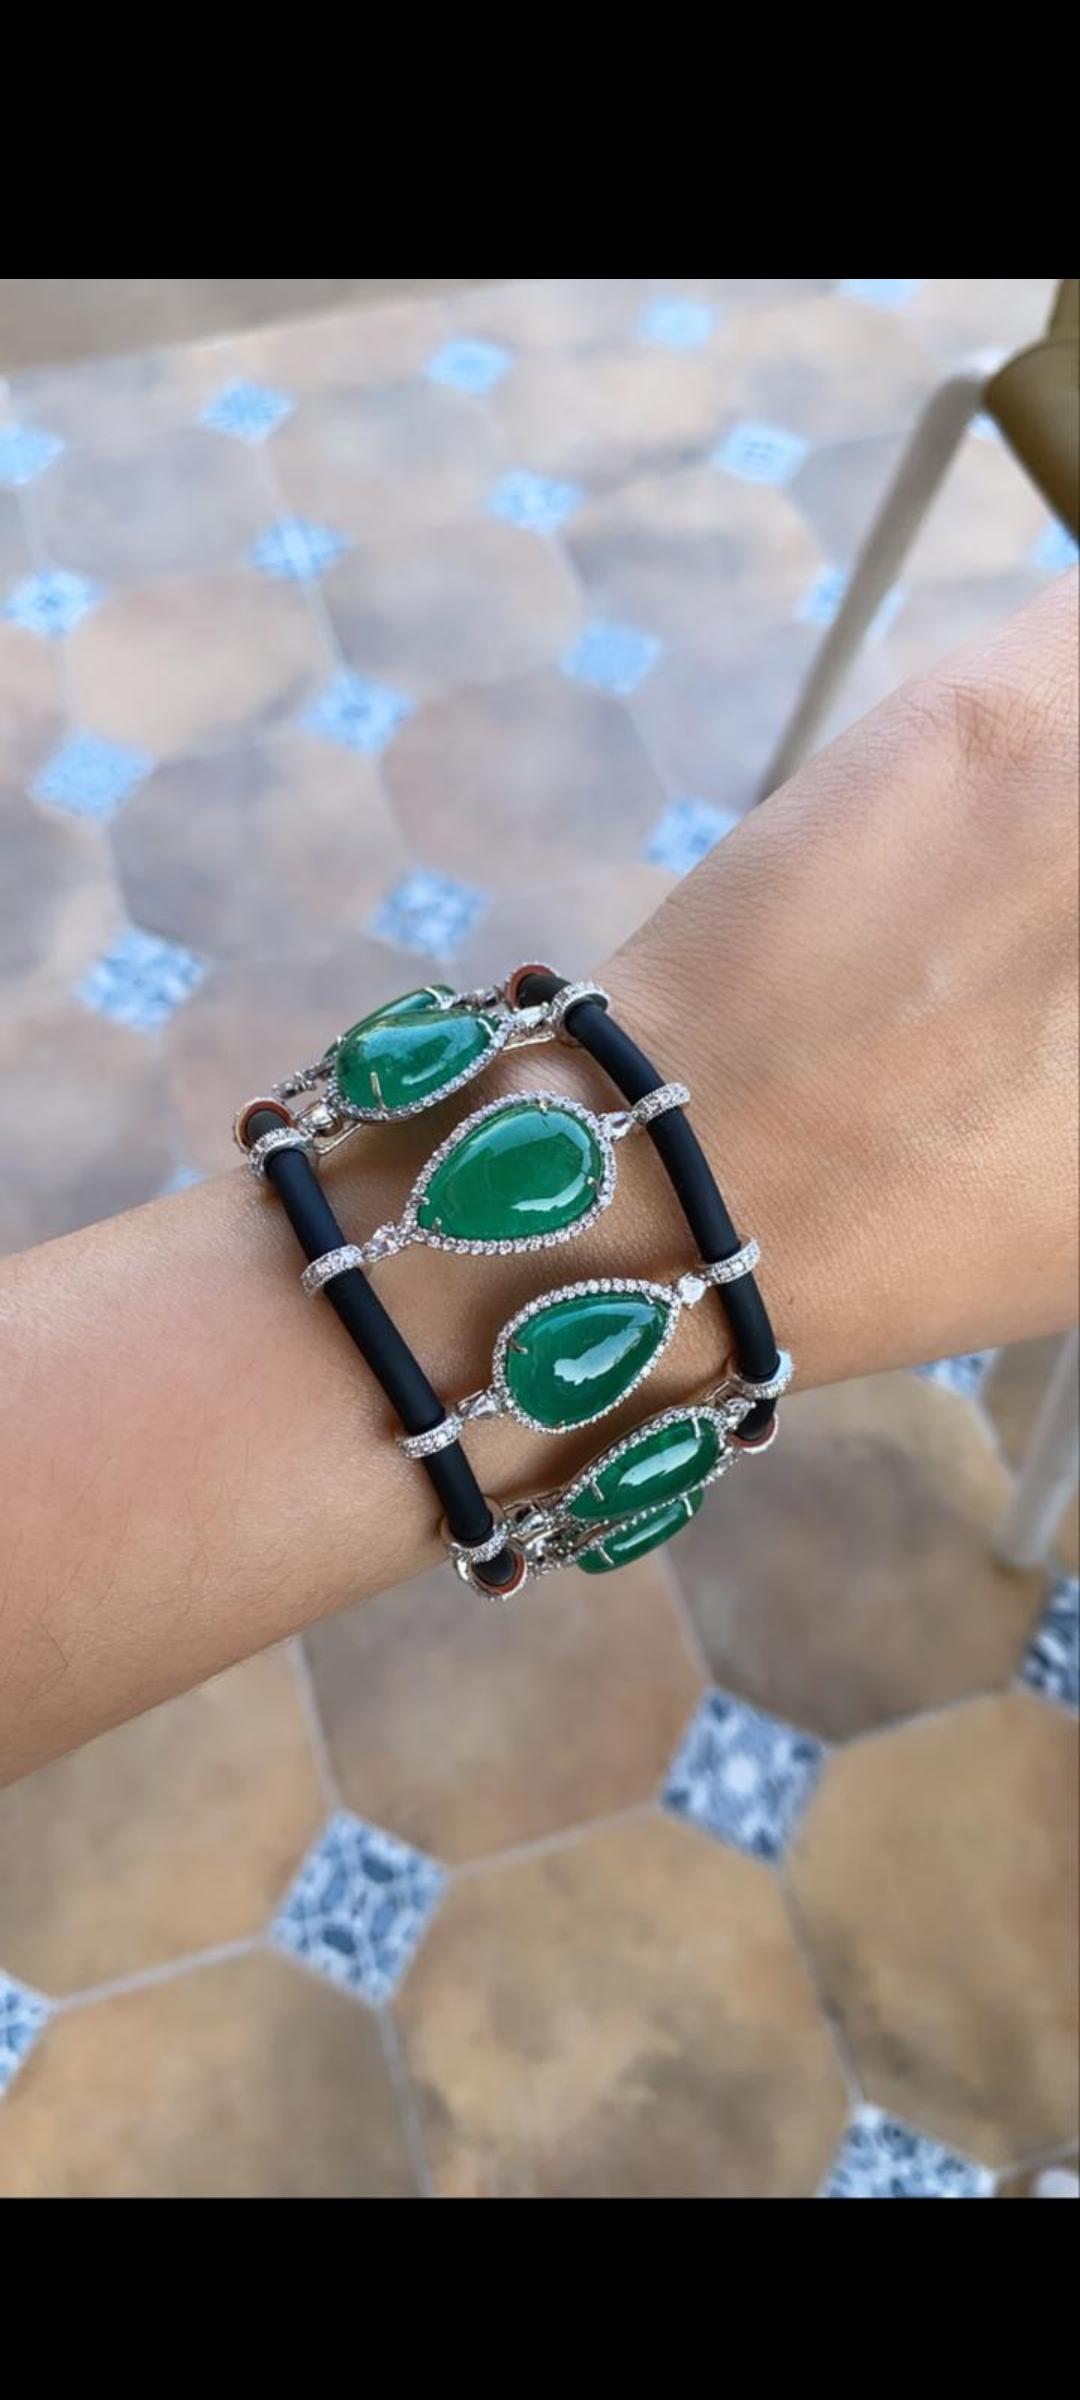 A modern and chic natural emerald and diamond bracelet set in 18k white gold on a leather/rubber chord. The emerald is natural and weight is 76.73 carats with 4.82 carats diamond weight . The net gold weight is 36.455 grams and bracelet dimensions